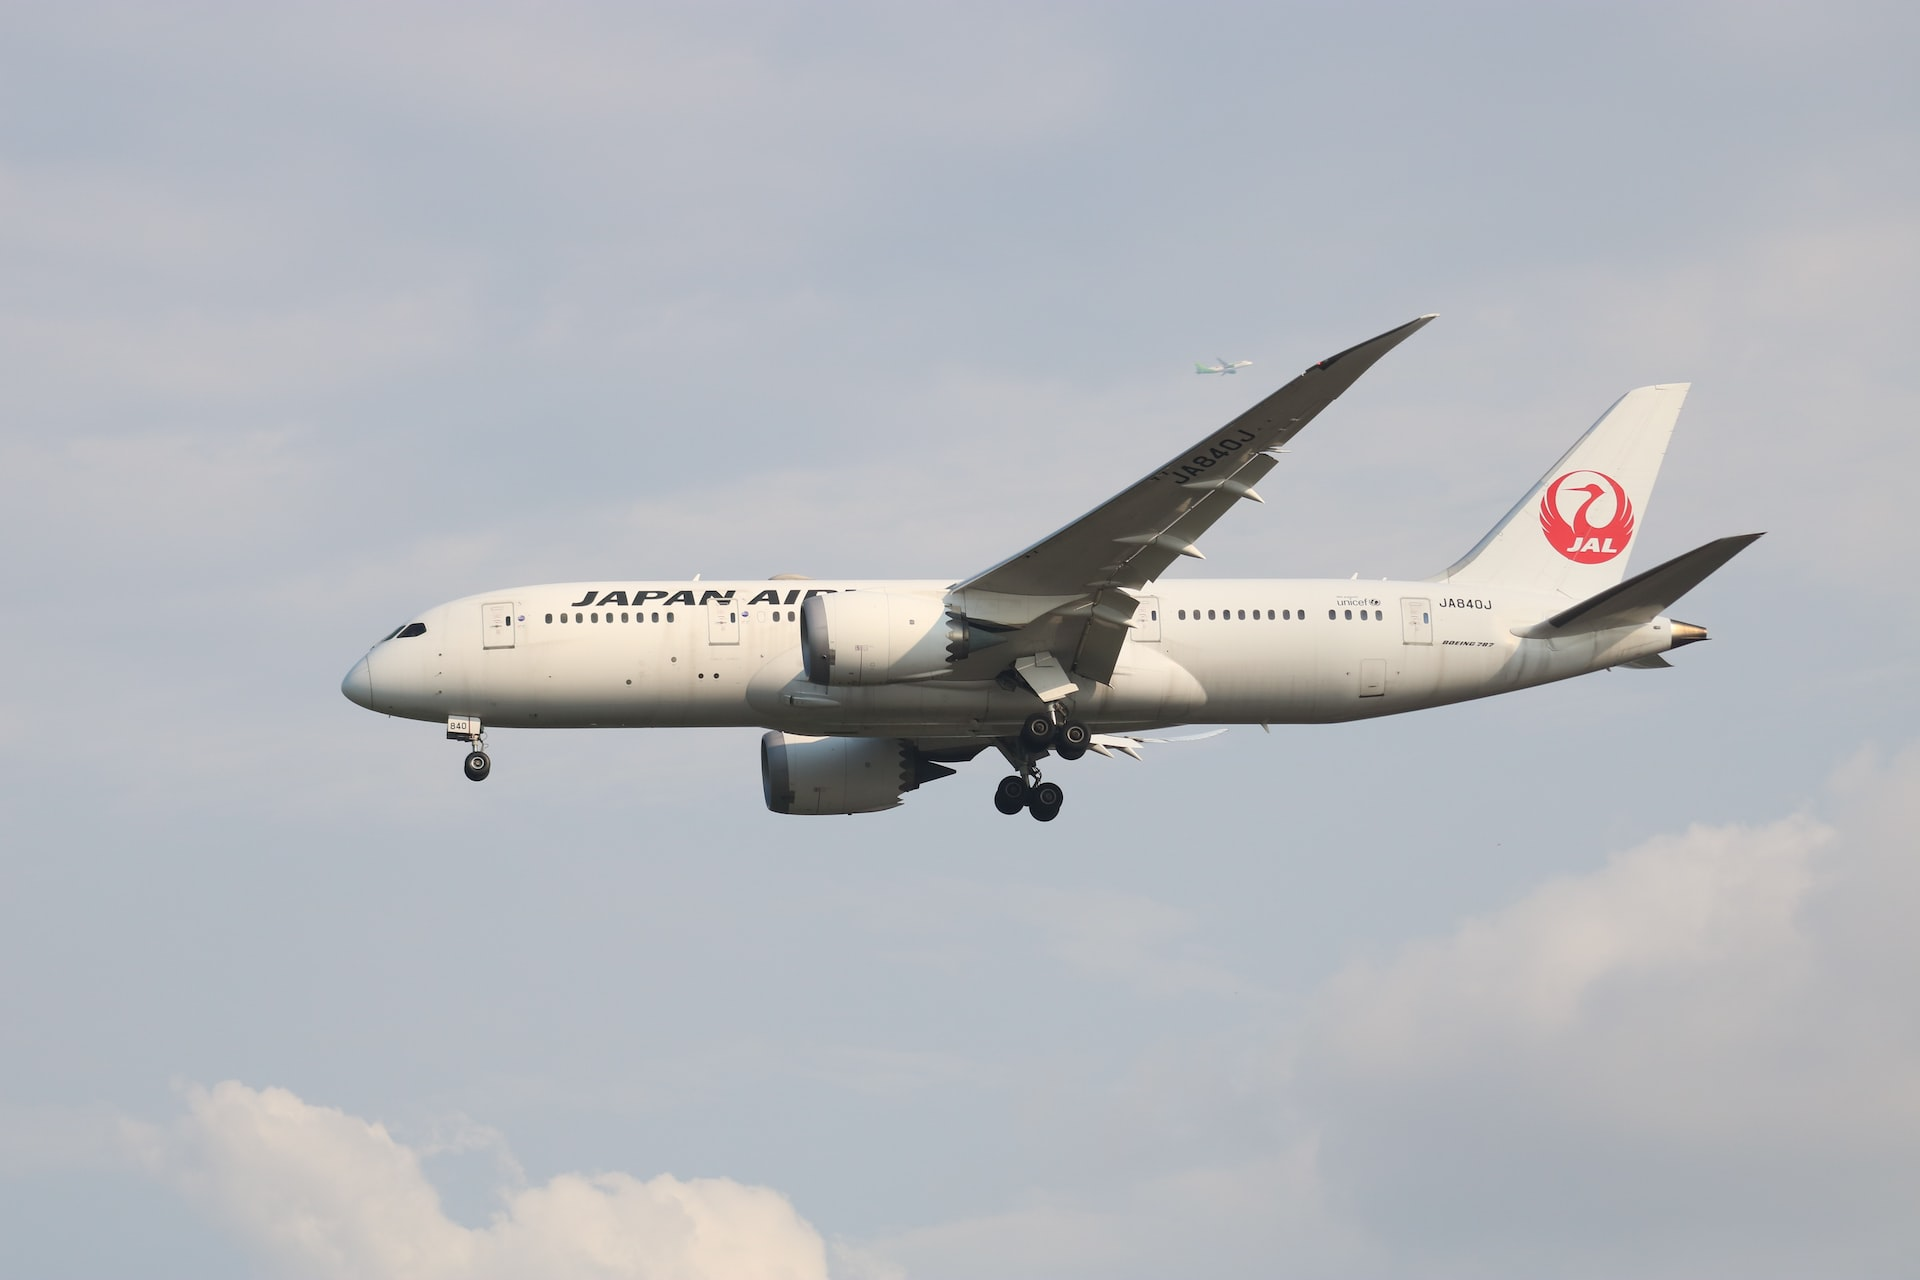 Japan Airlines Airbus ready to land on the runway.